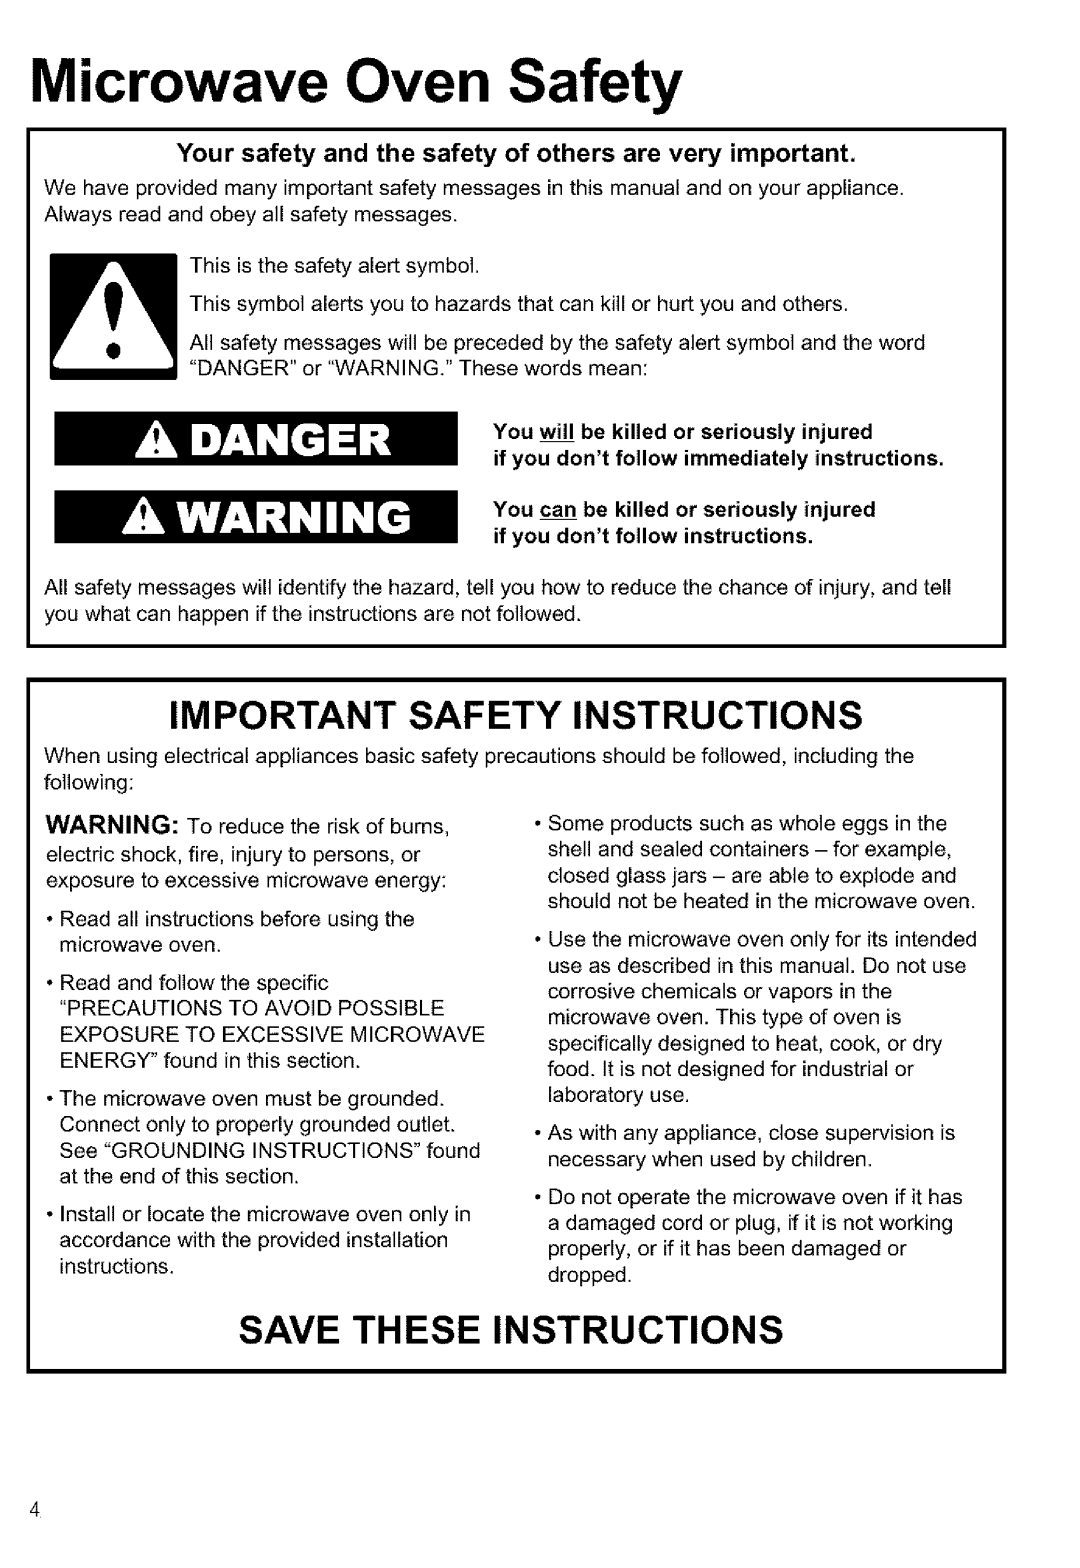 Kenmore 721.64689, 721.64684, 721.64682 manual Microwave Oven Safety, Important Safety Instructions, Save These Instructions 